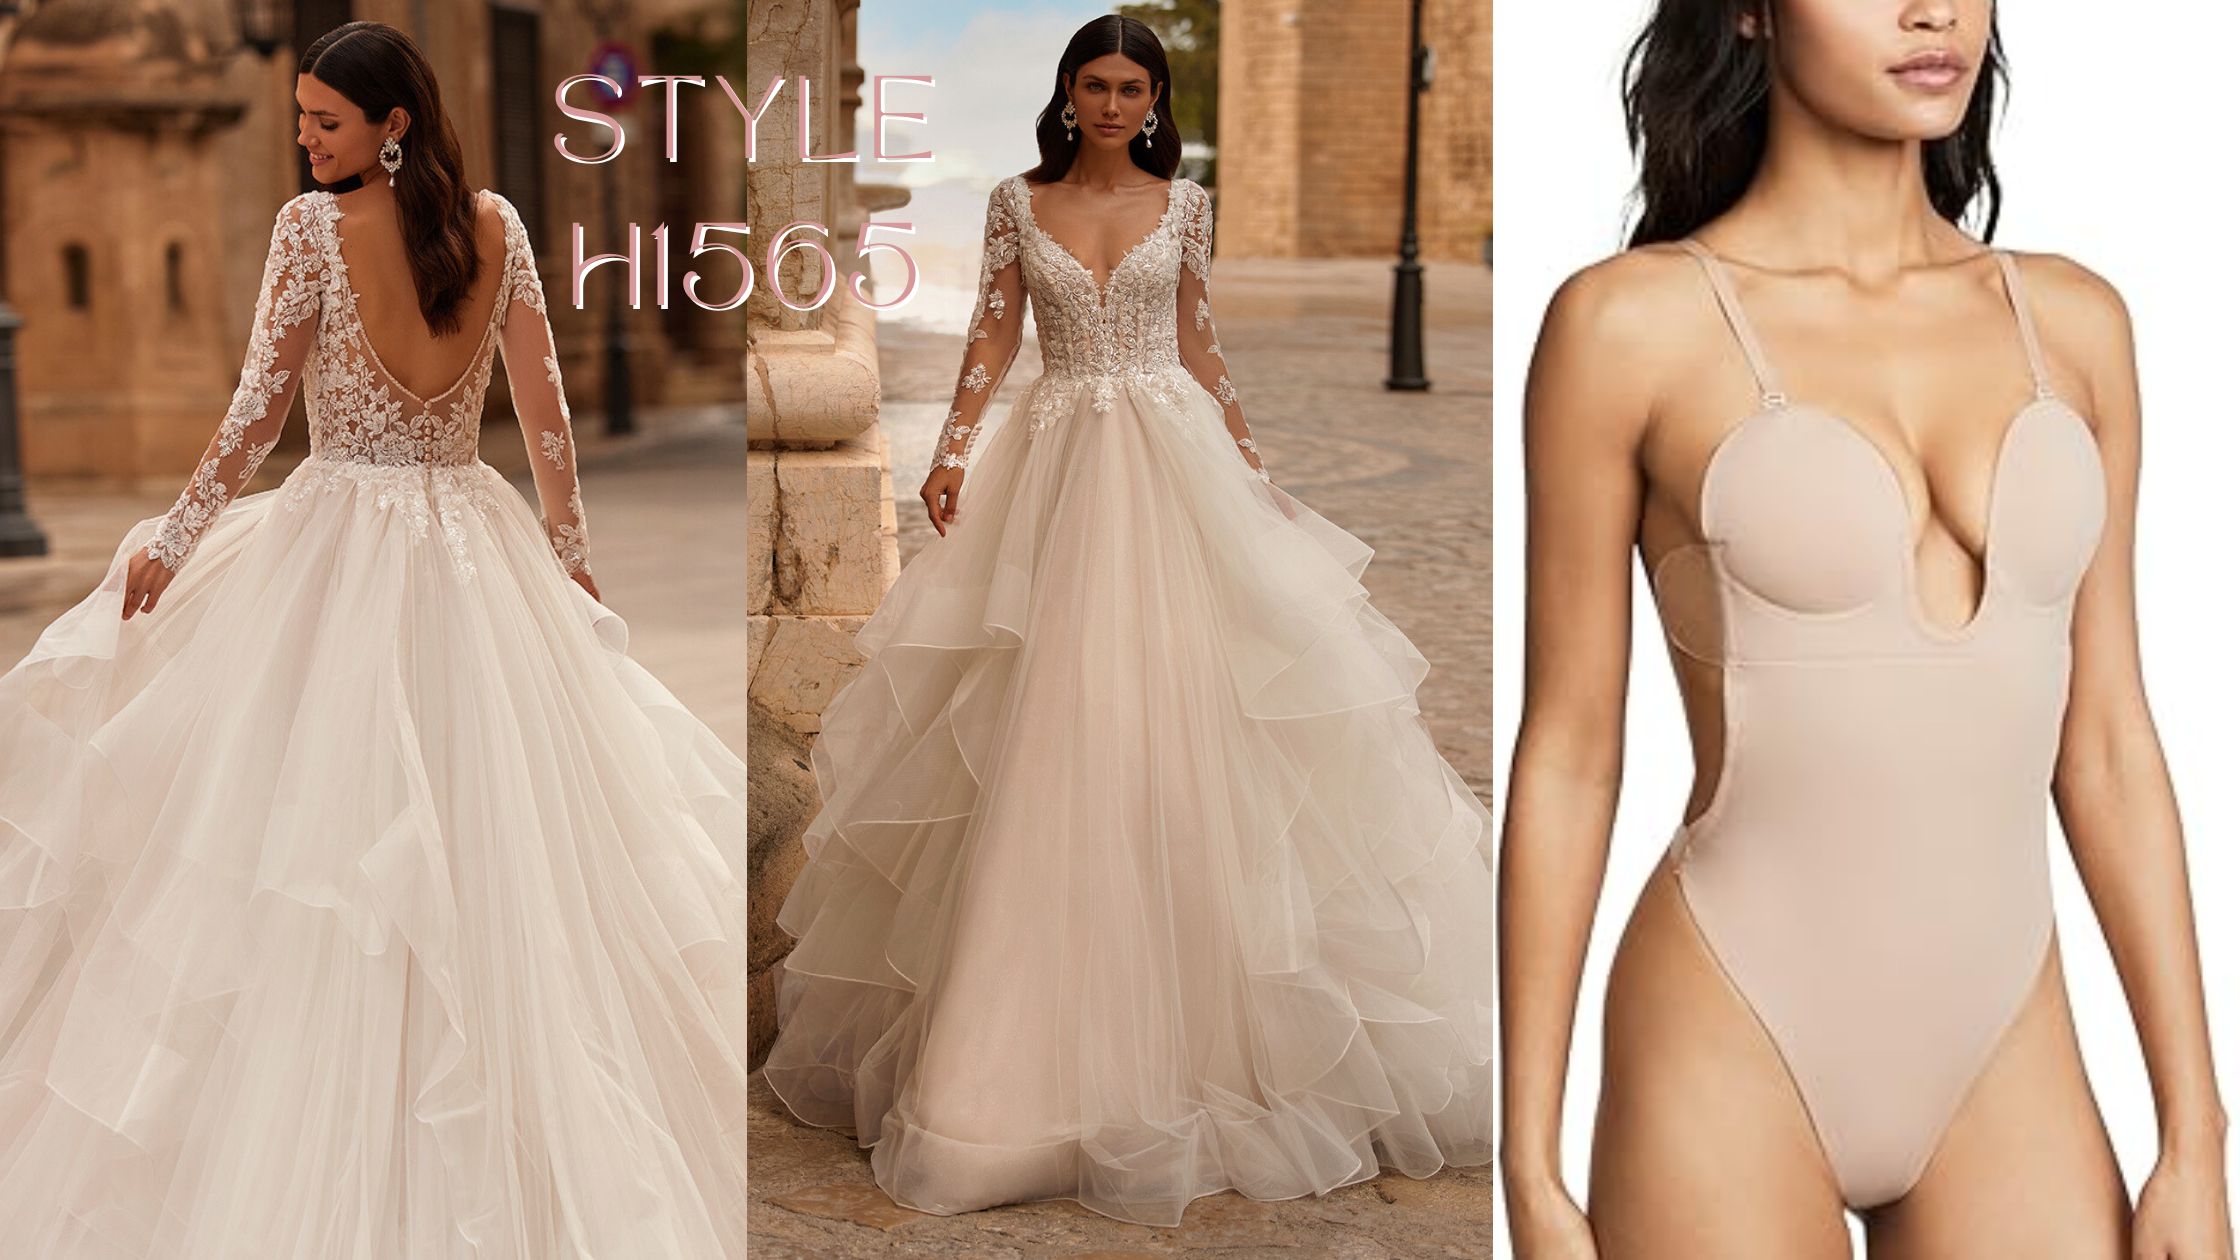 Bride wearing a ball gown with a plunging neckline and a woman wearing a U plunge bodysuit that would work with a plunging neckline gown